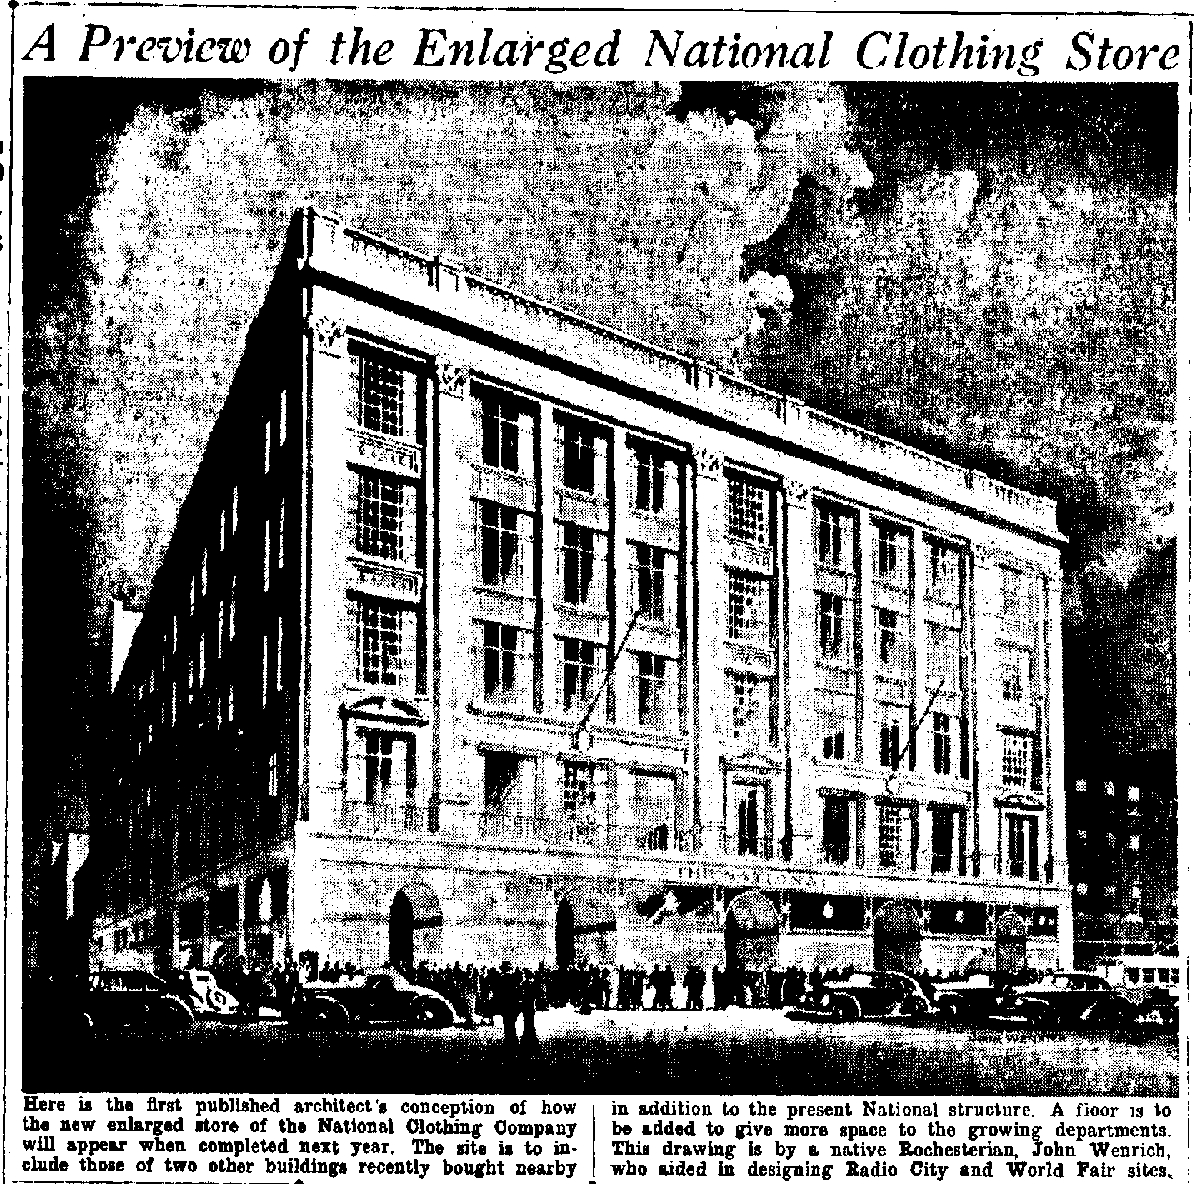 An architect concept drawing showing how the National Clothing Store would have looked after a proposed expansion in 1938.